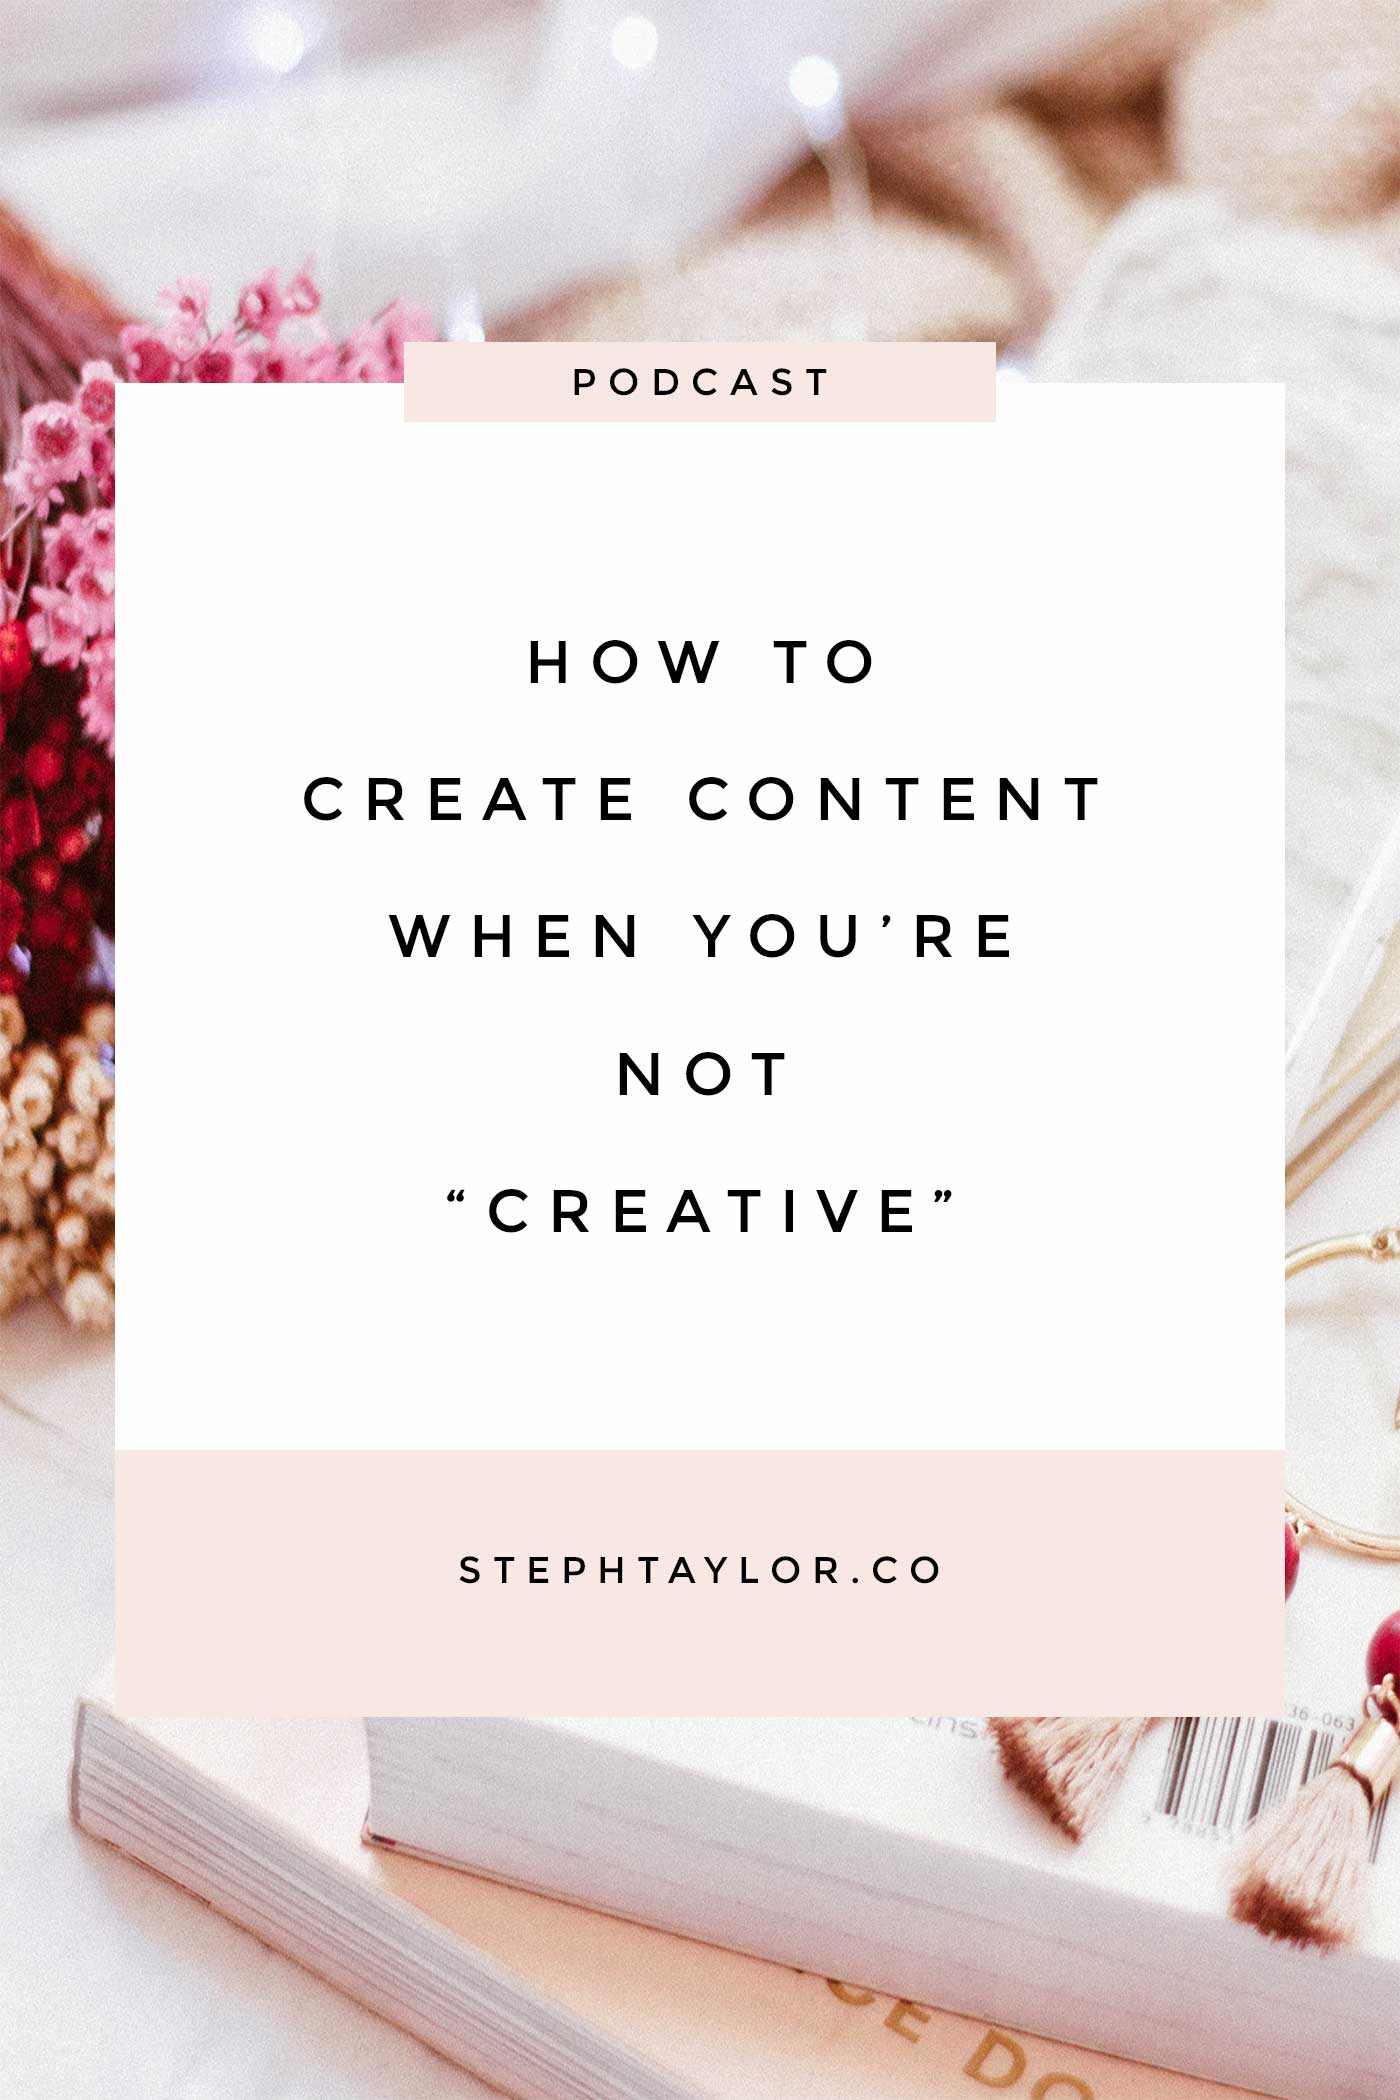 How to create content when you're not creative